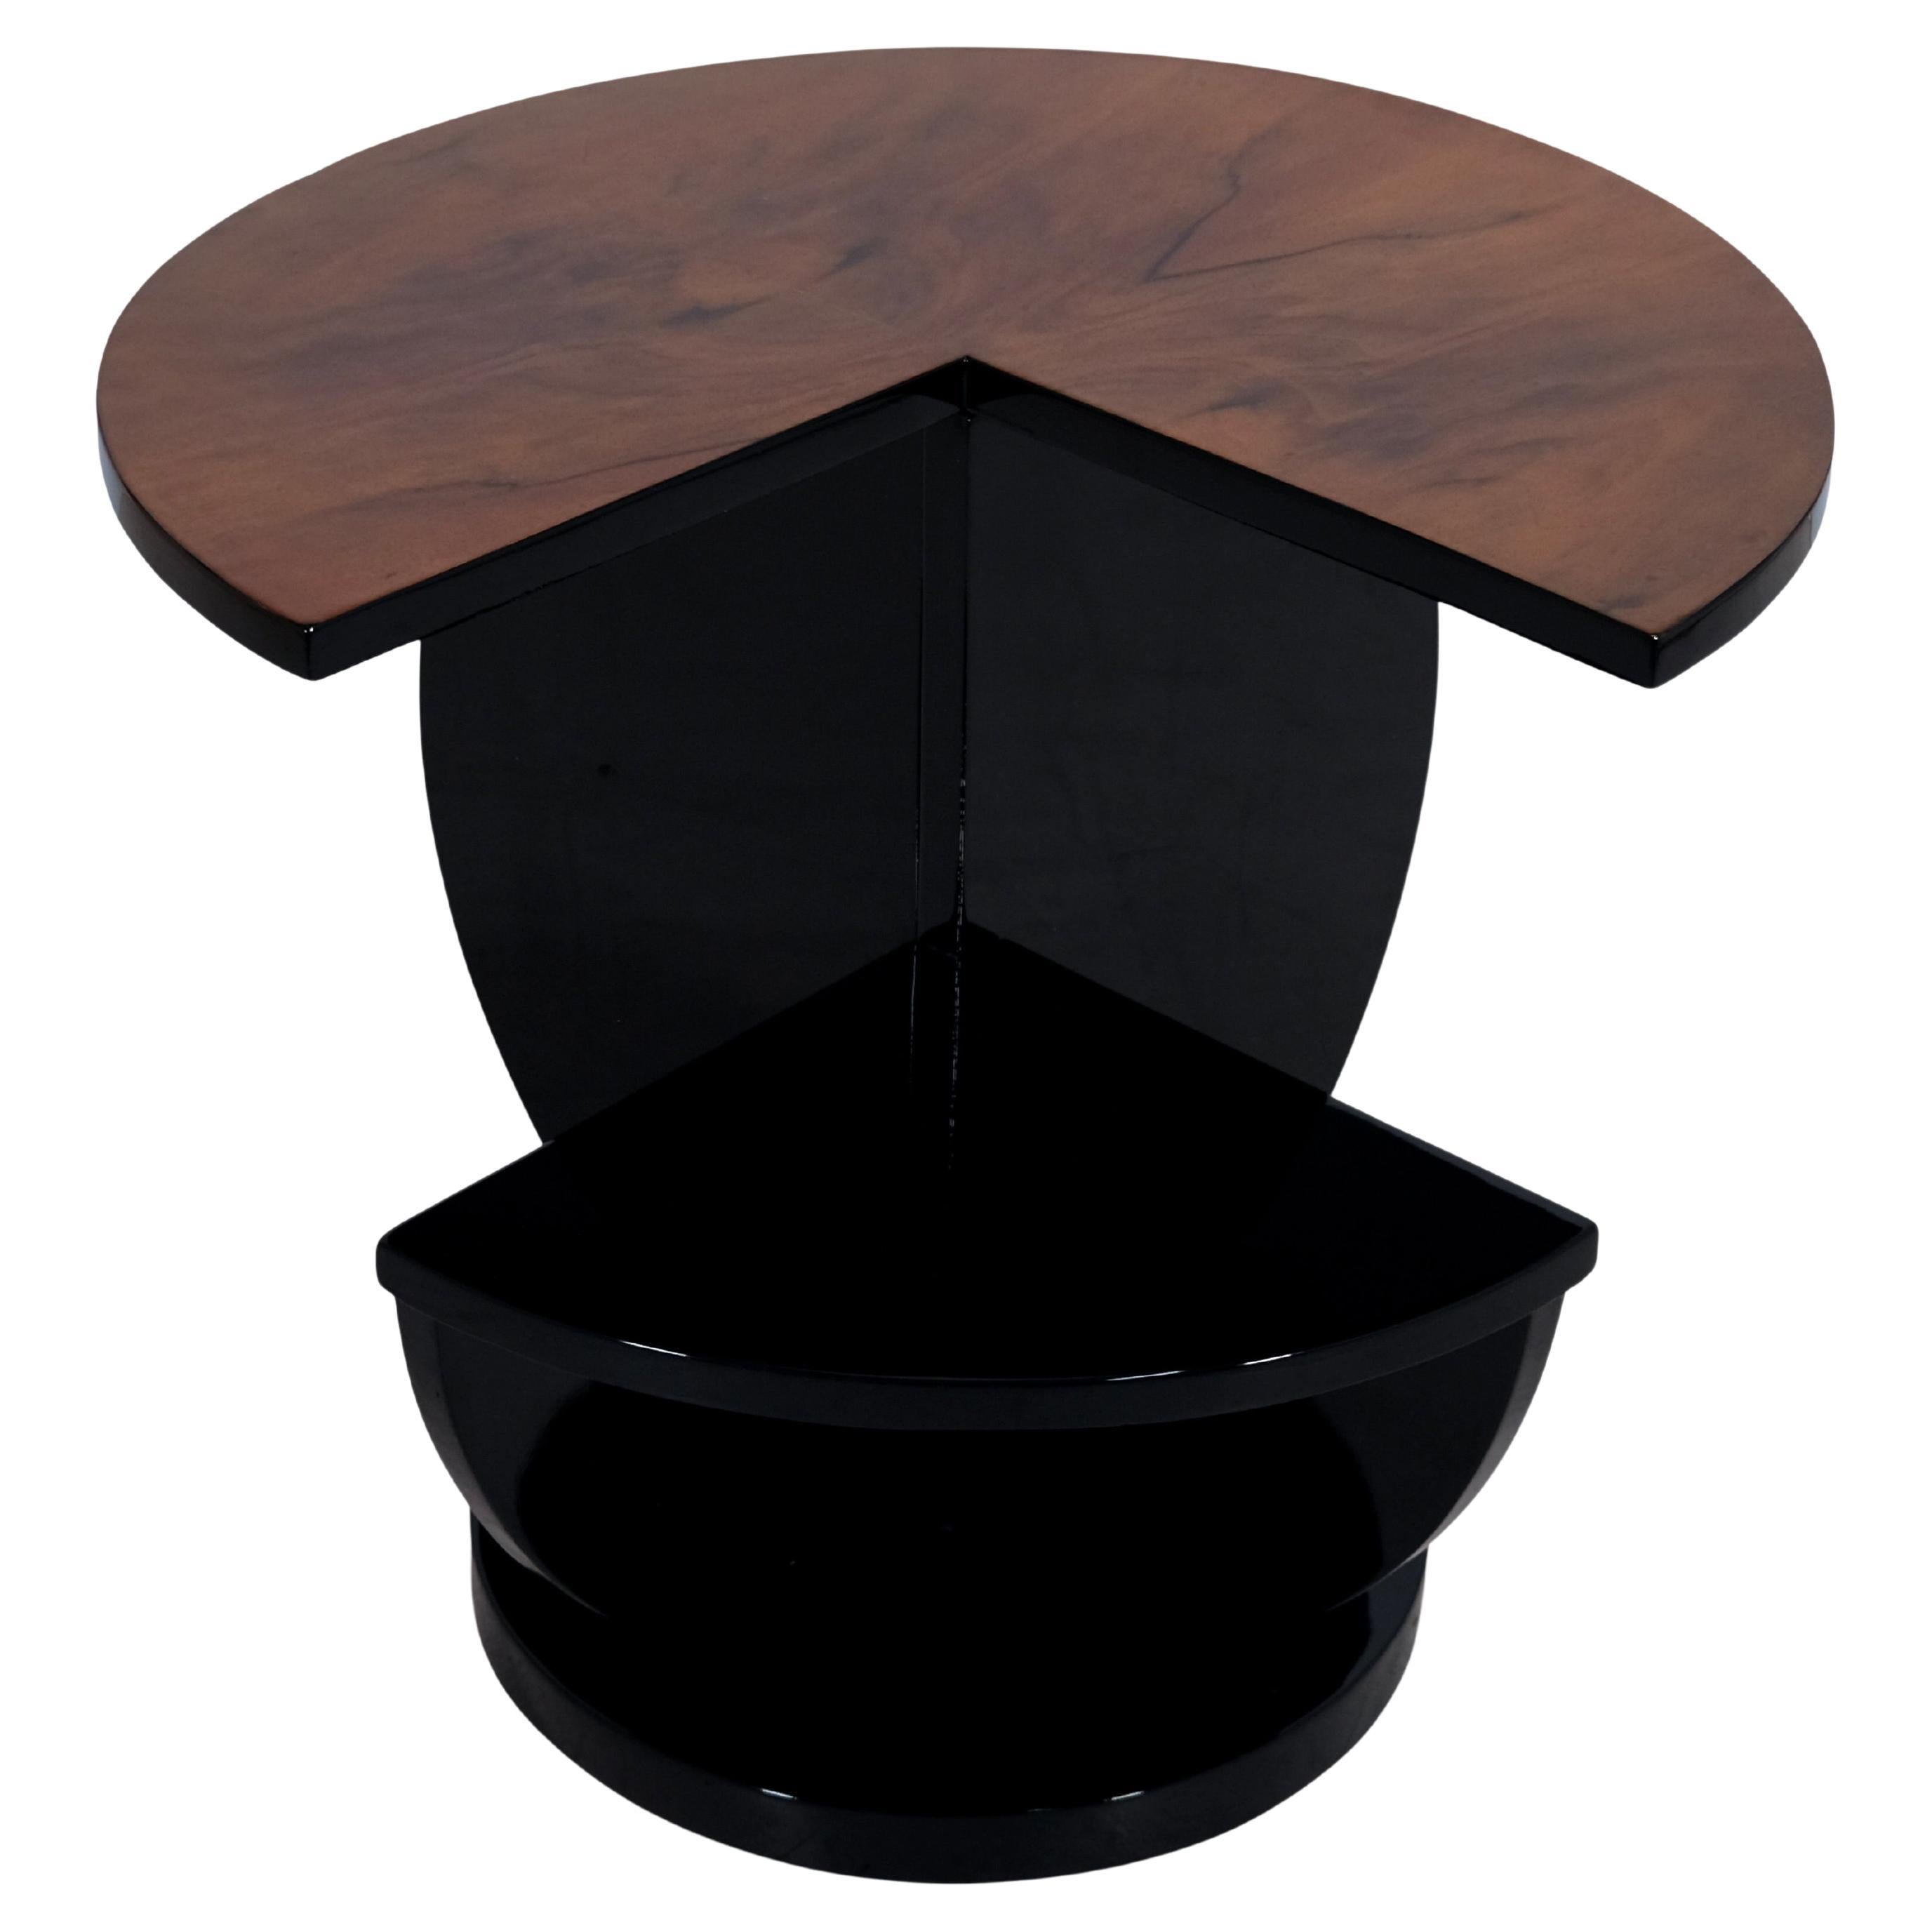 Segmented 1930s French Art Deco Side Table in High Gloss Black and Nutwood